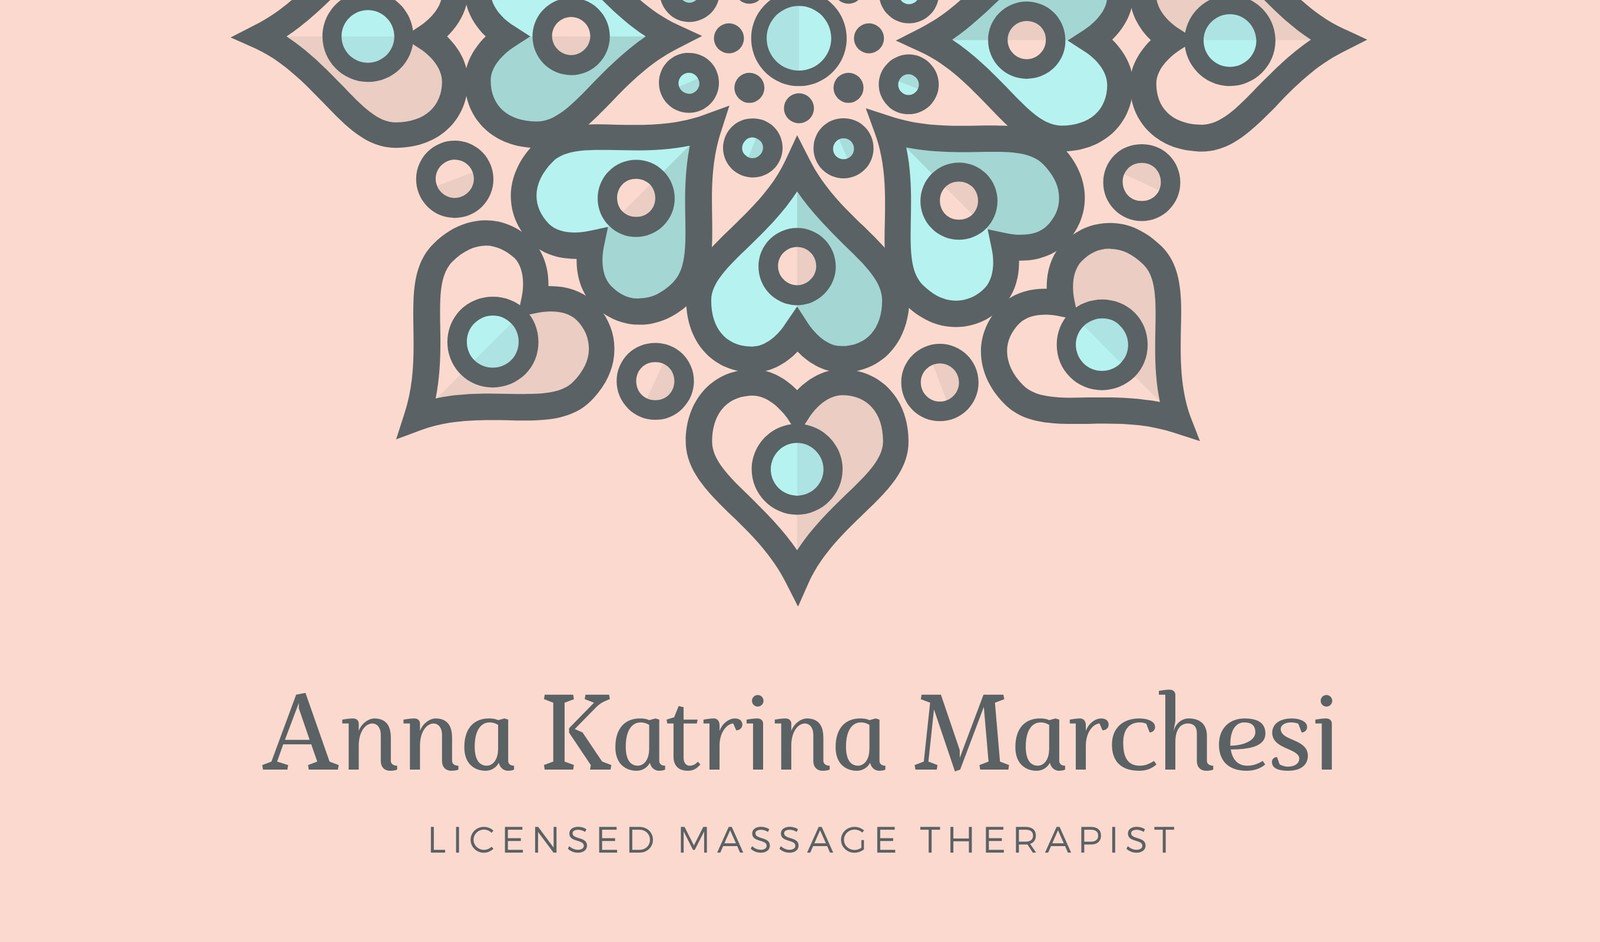 Free printable massage therapist business card templates  Canva Pertaining To Massage Therapy Business Card Templates